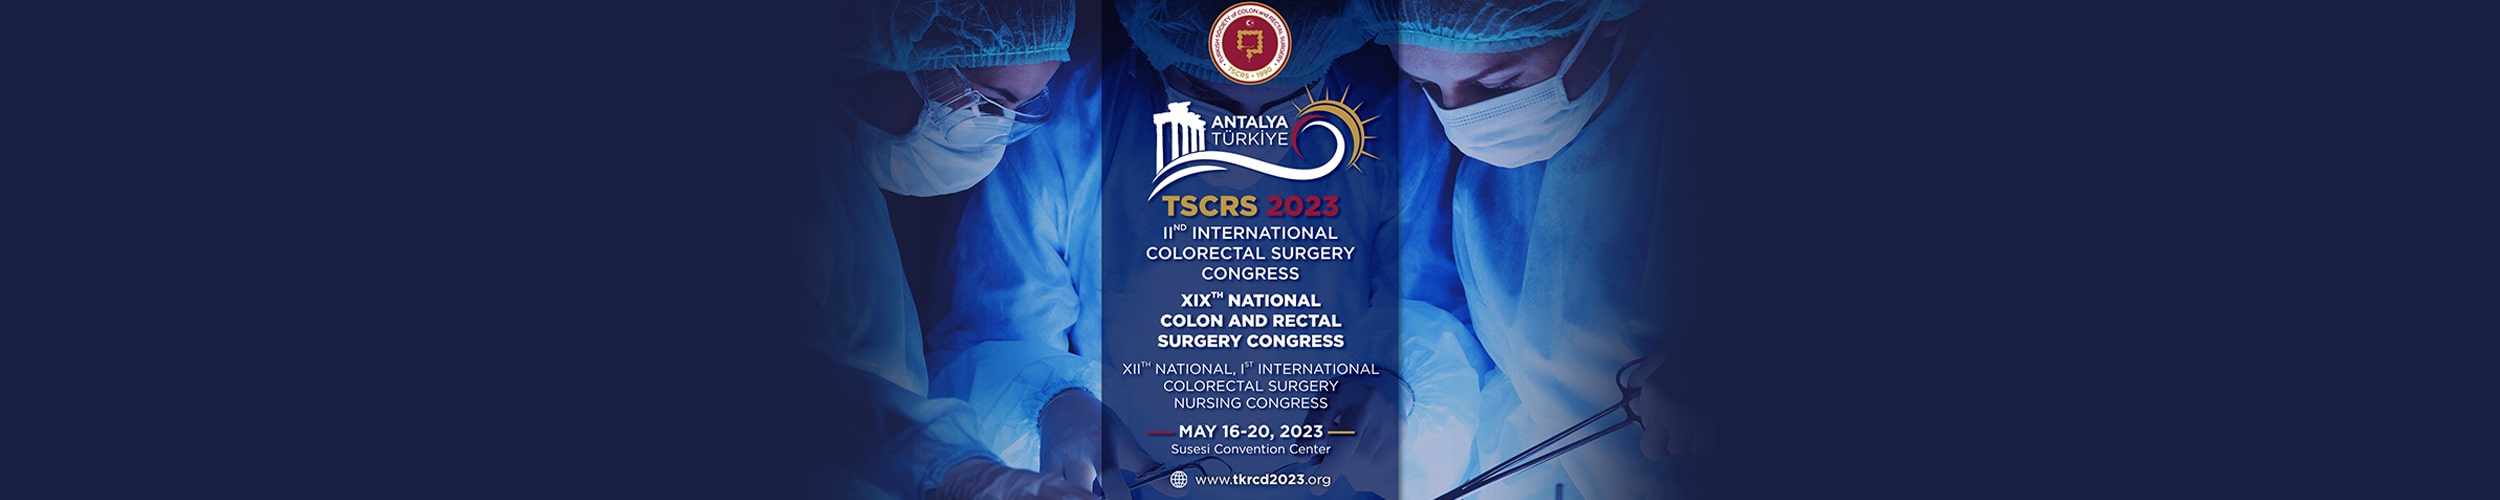 19th: Turkish Colon and Rectal Surgery Congress